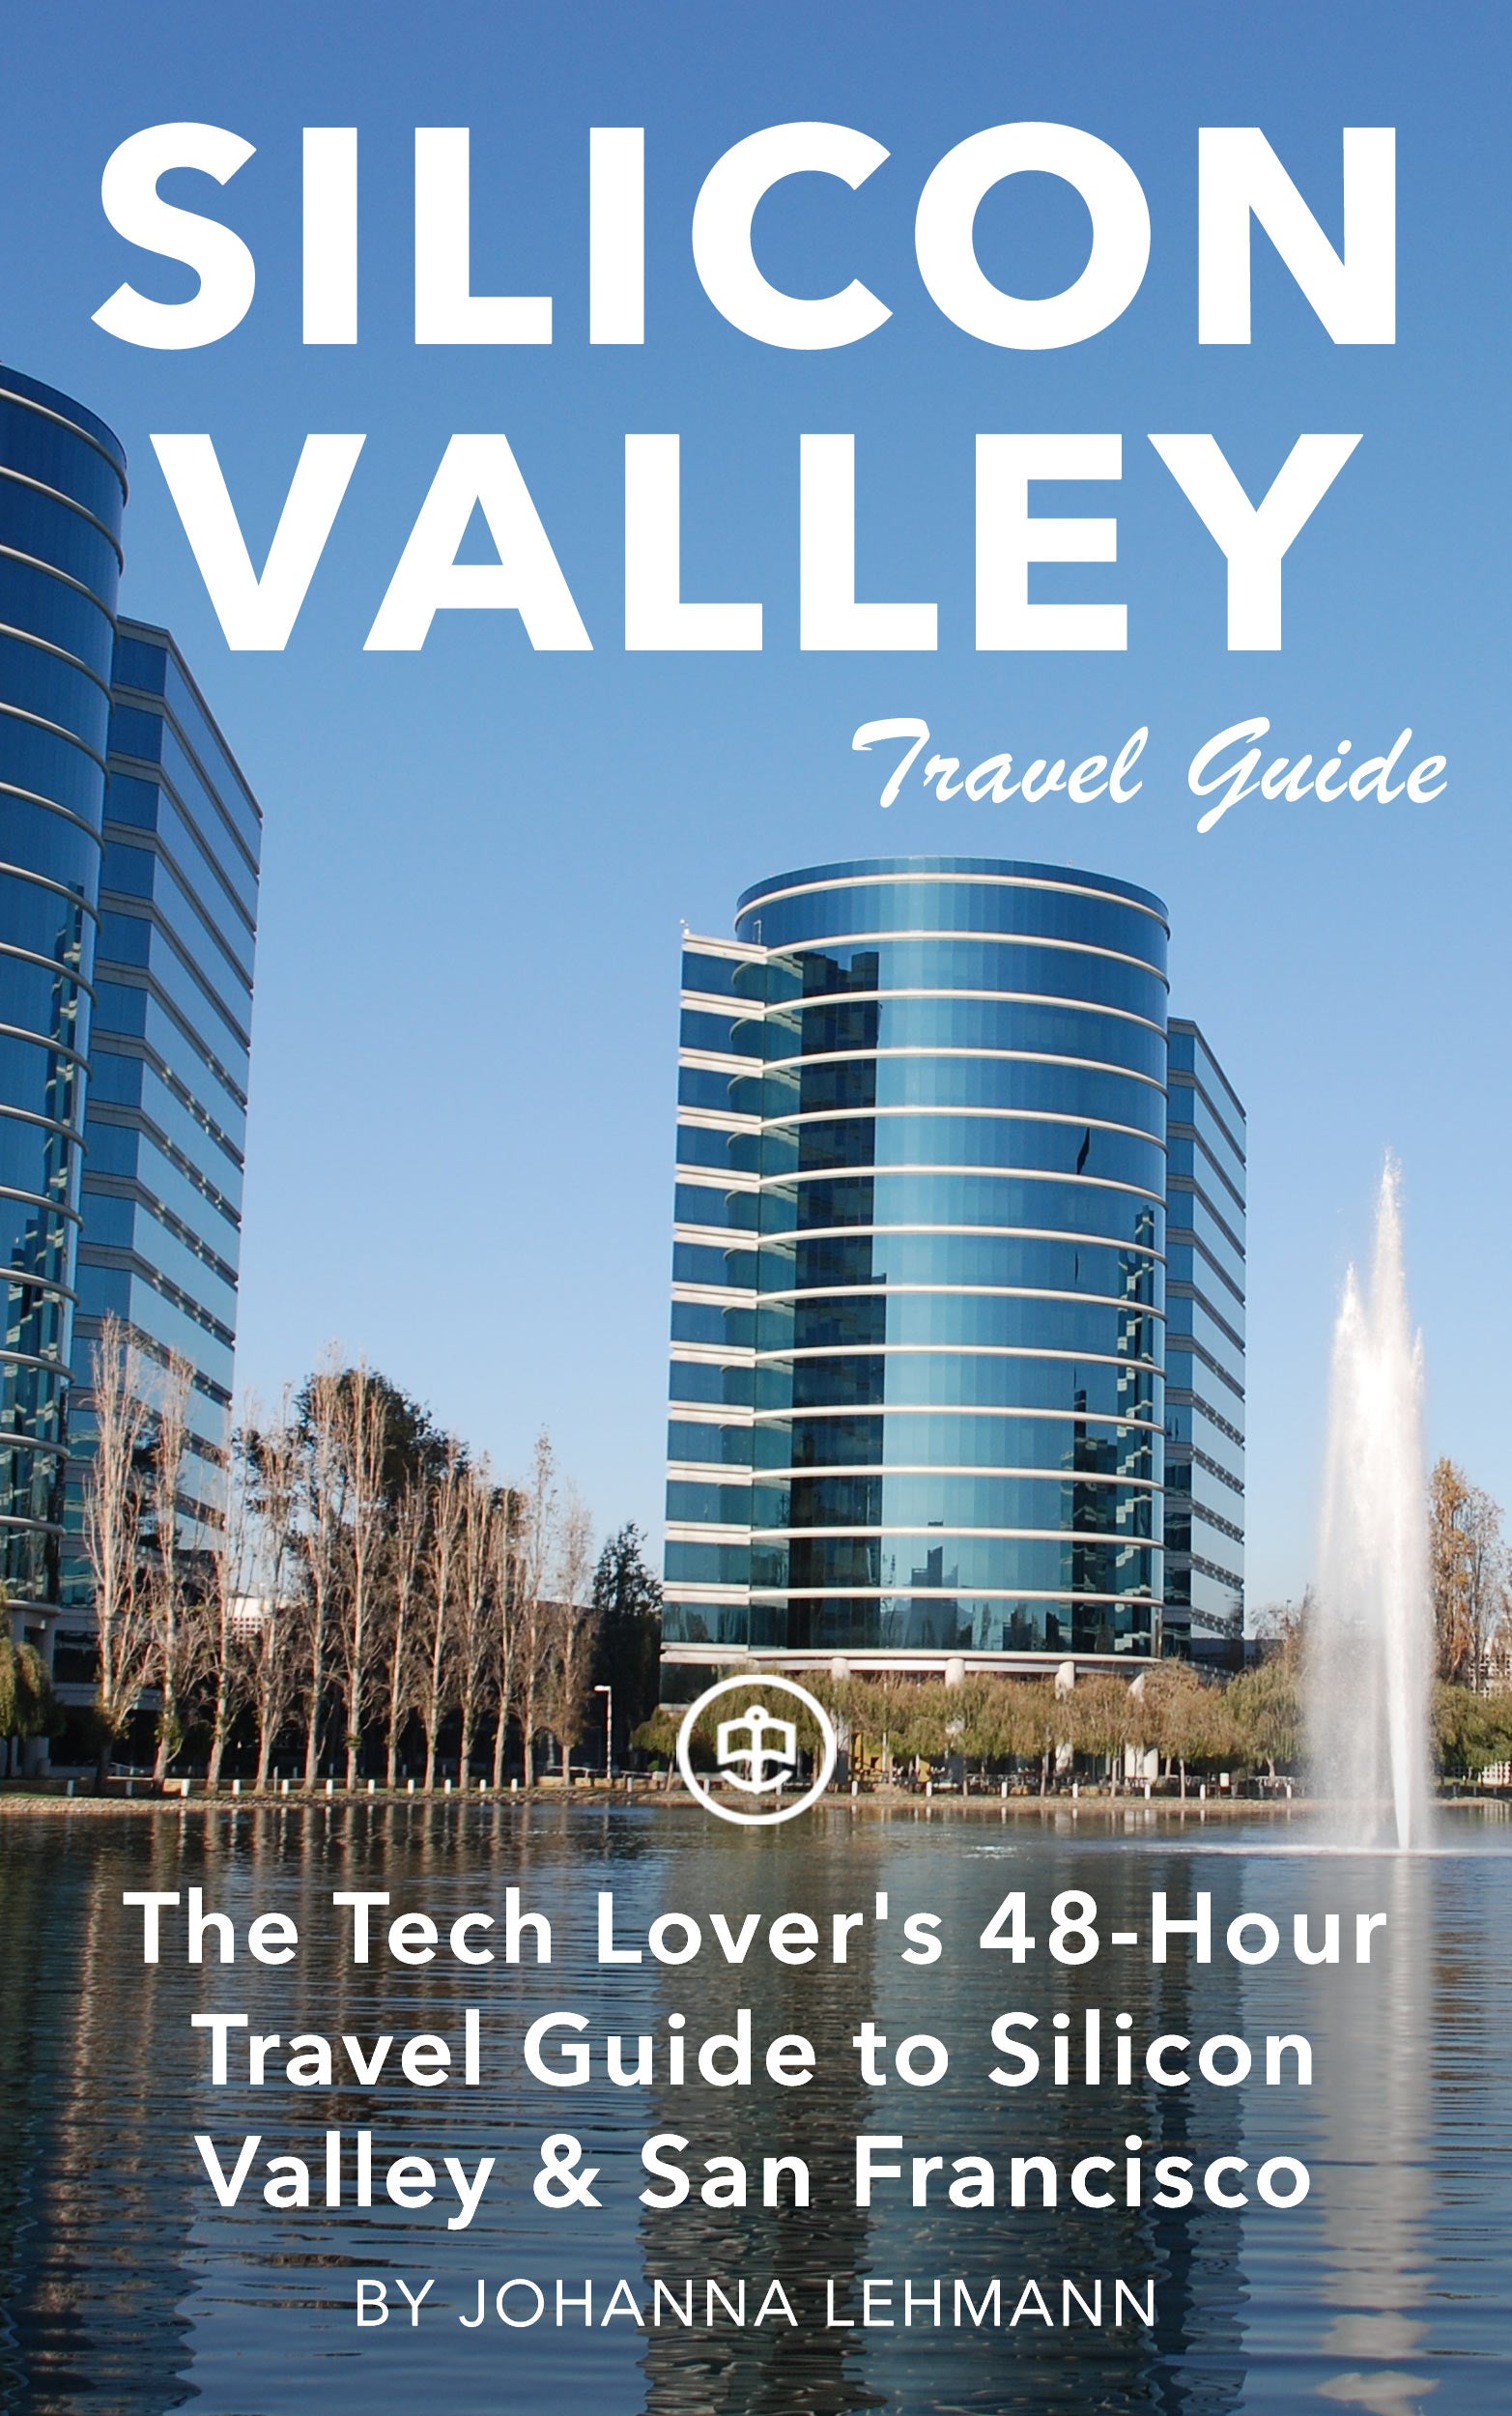 The Tech Lover's 48-Hour Travel Guide to Silicon Valley & San Francisco